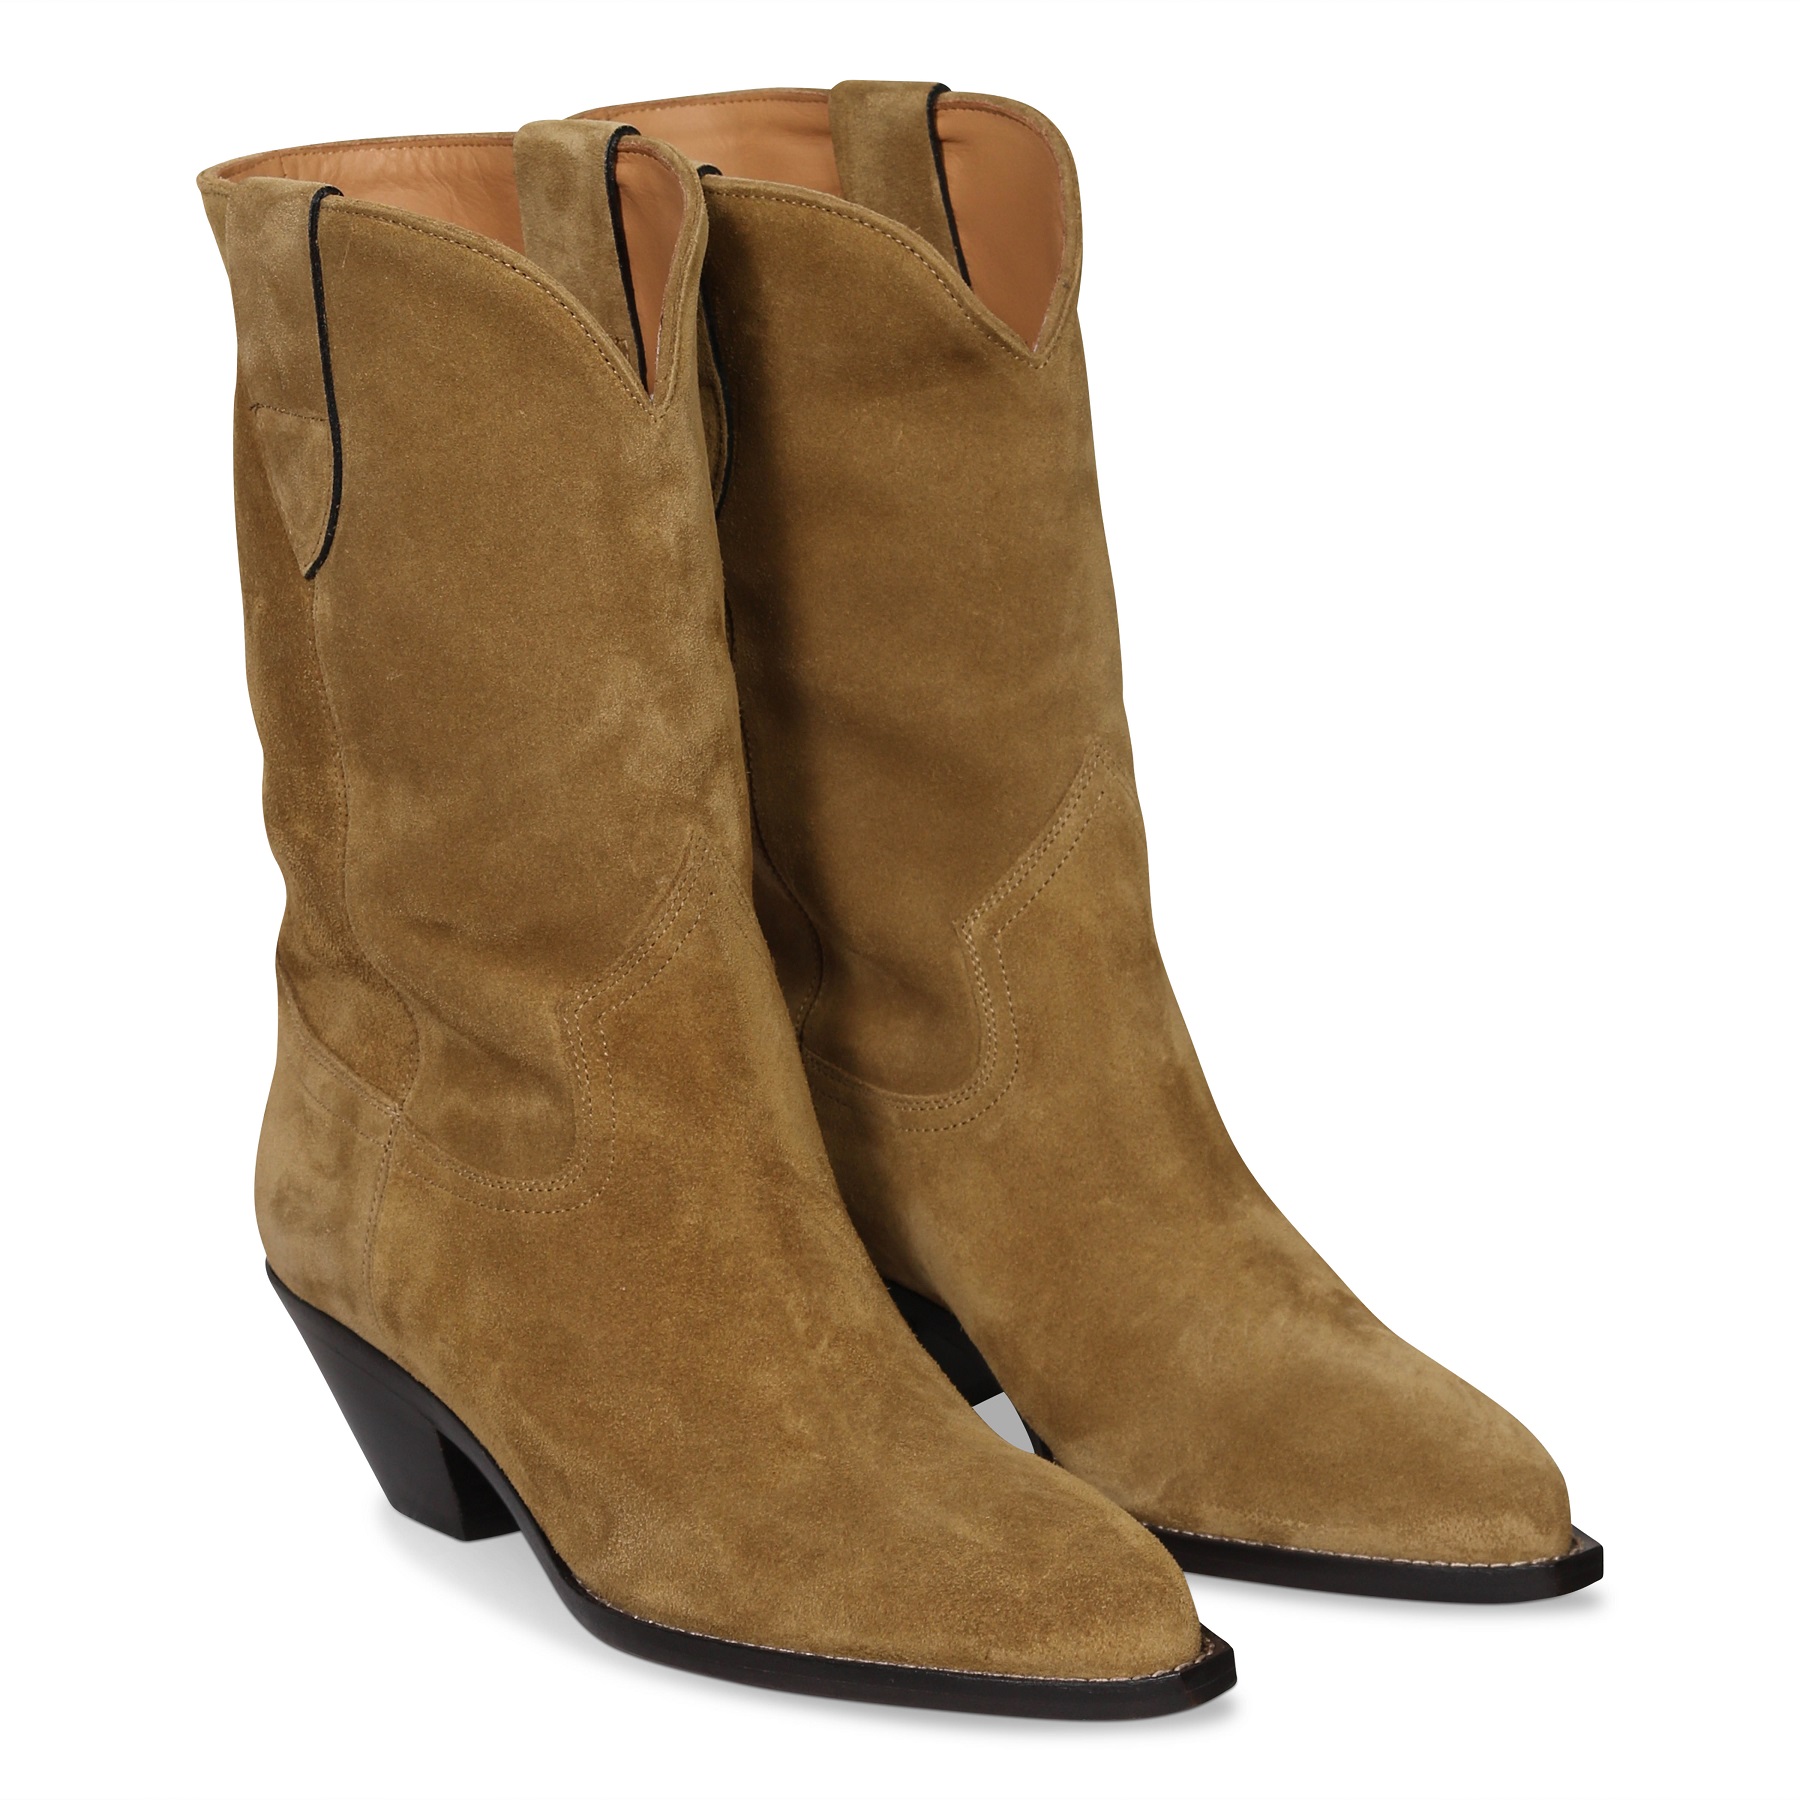 ISABEL MARANT Dahope Boots in Taupe 39